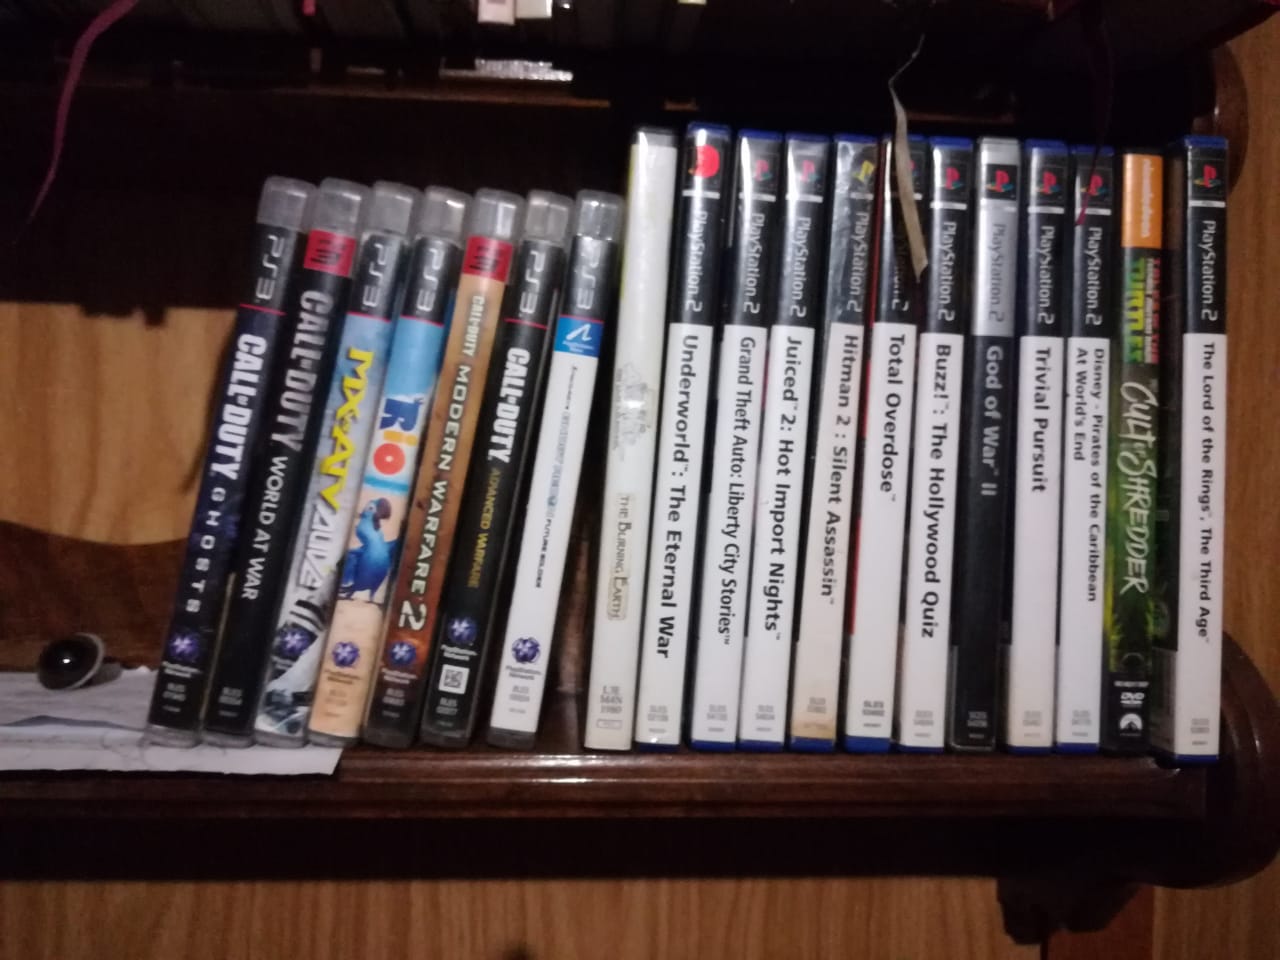 Playstation 2 and 3 with games